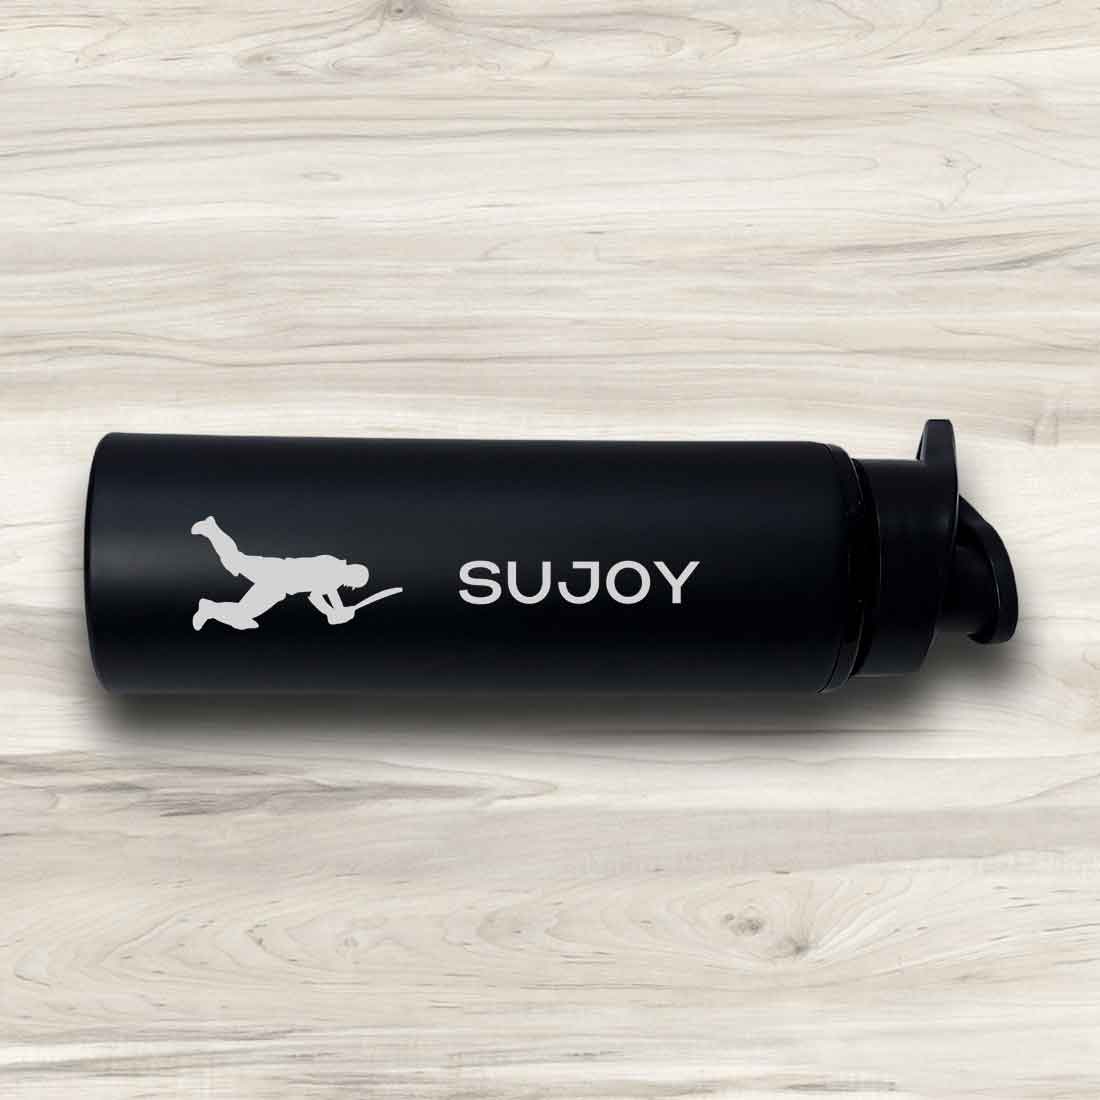 Customized Stainless Steel Bottle With Sipper for School Office Use - Cricket